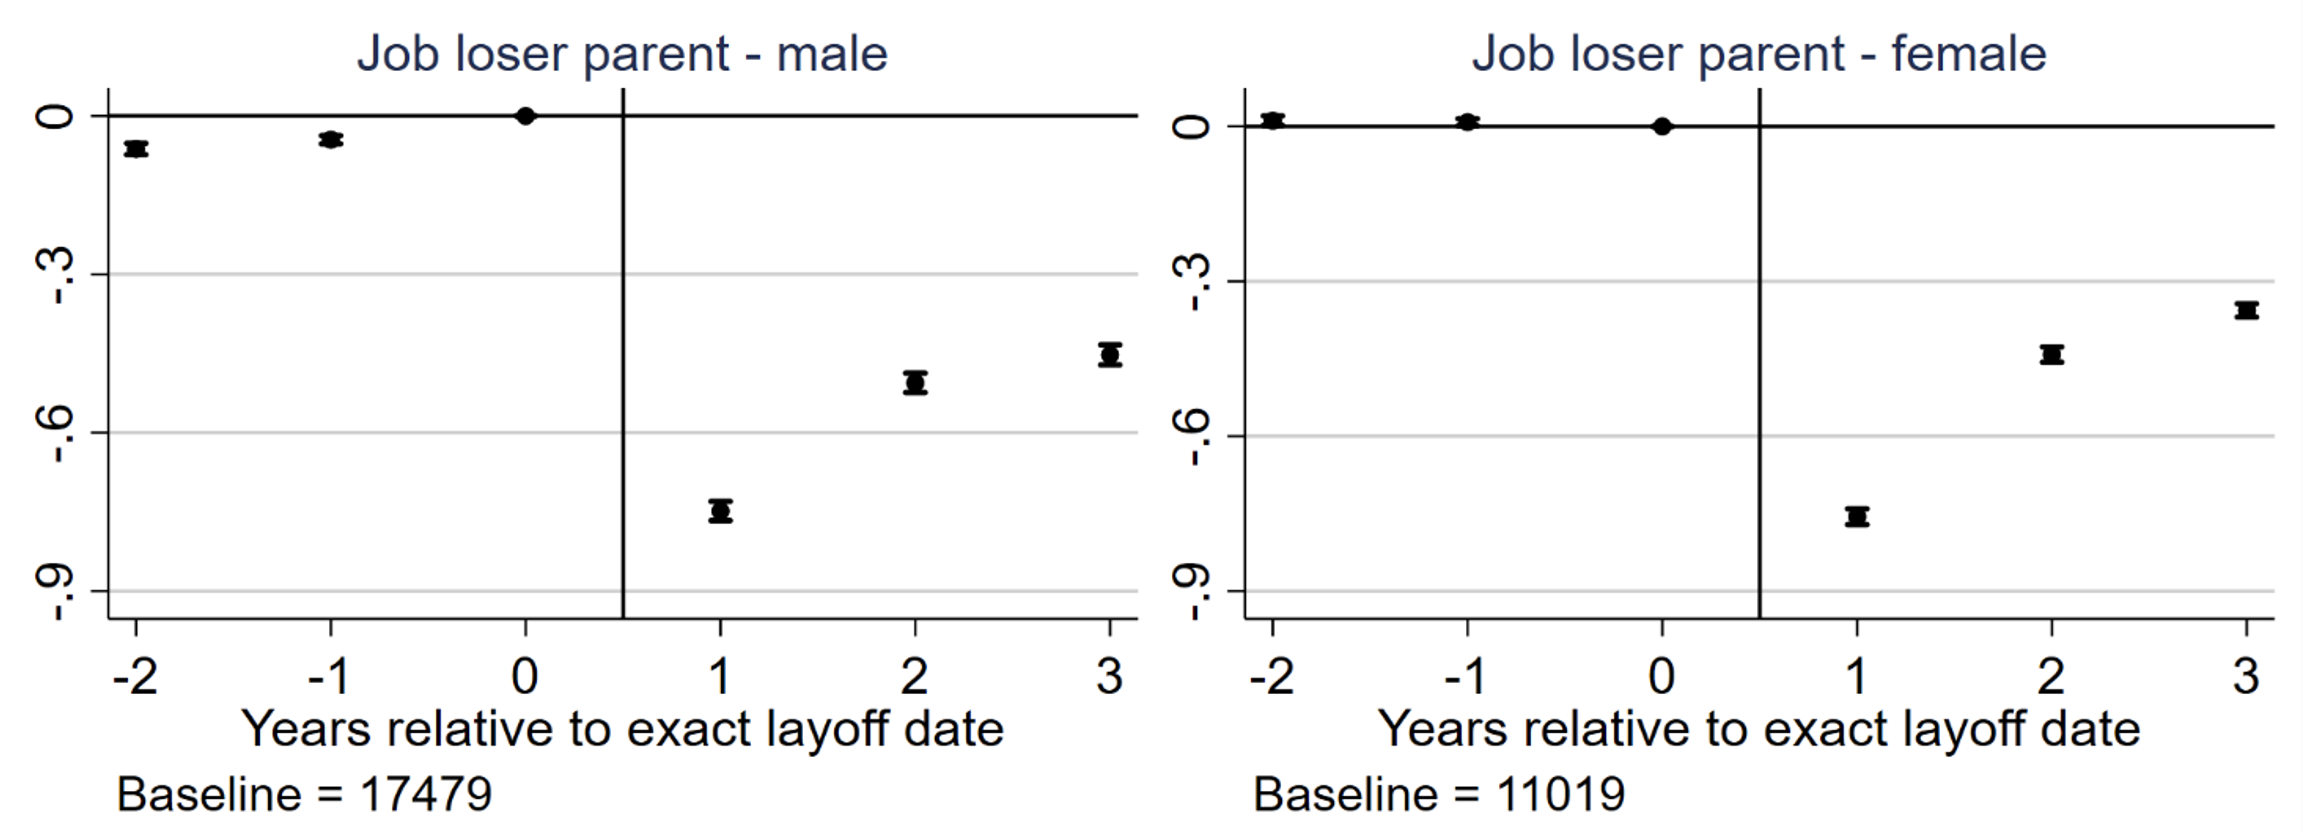 Figure 1 Job loss effects on labour income for fathers and mothers, effects relative to the baseline yearly income in BRL